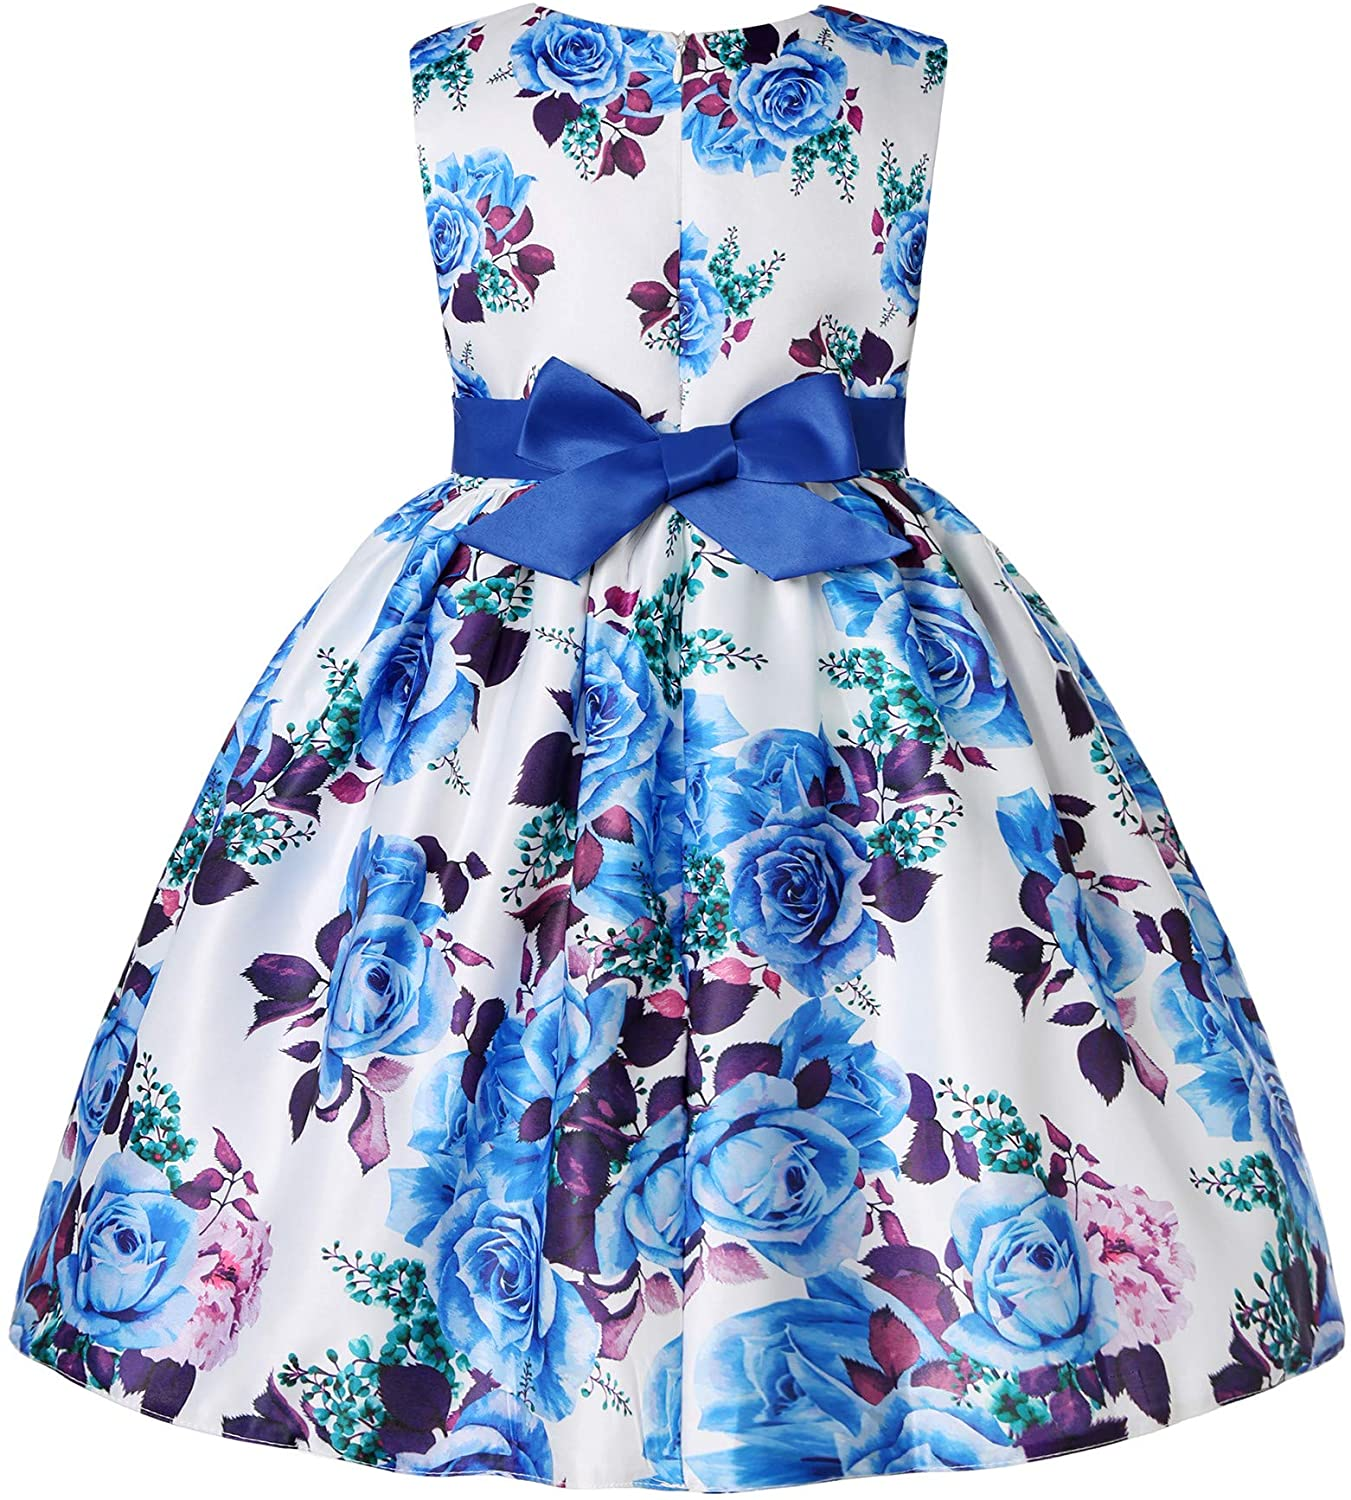 Girls Floral Print Pageant Dress, 2-9 Years